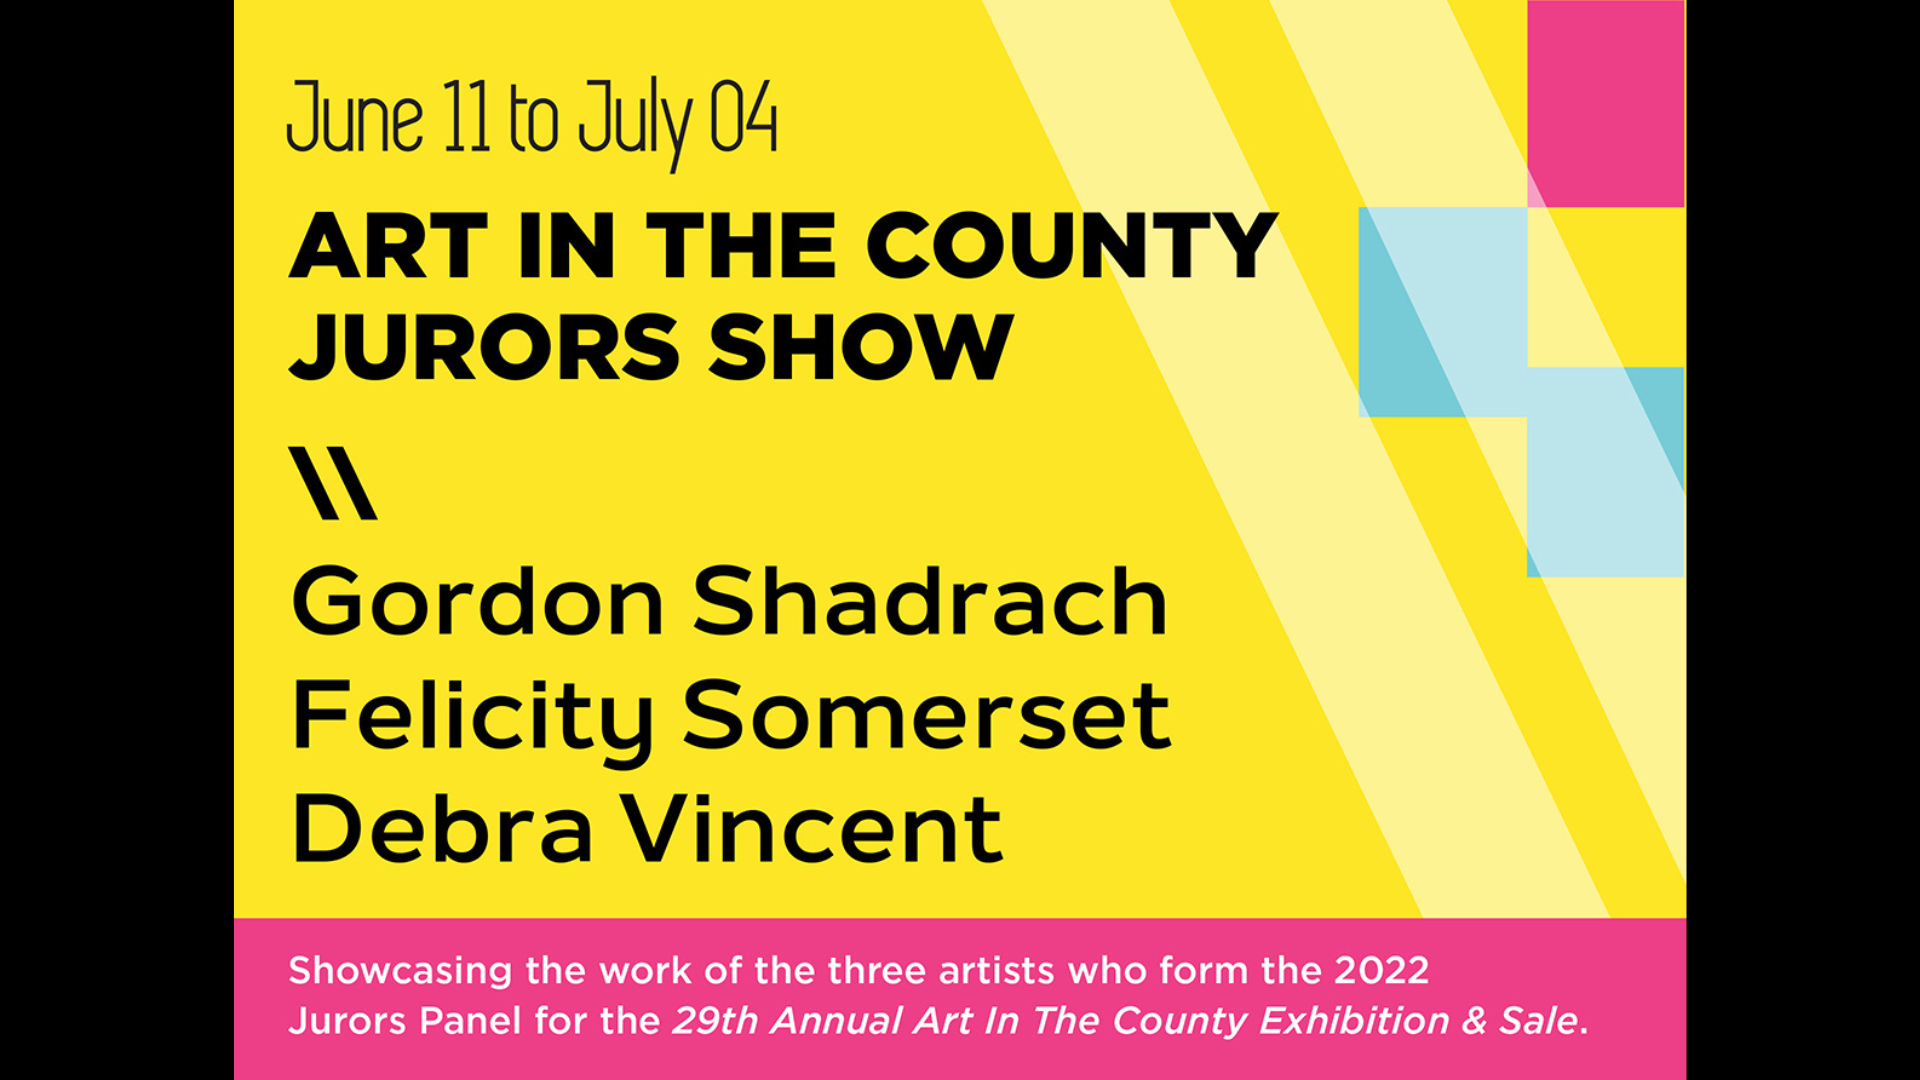 Promotional graphic for the Art in the County Juror Show